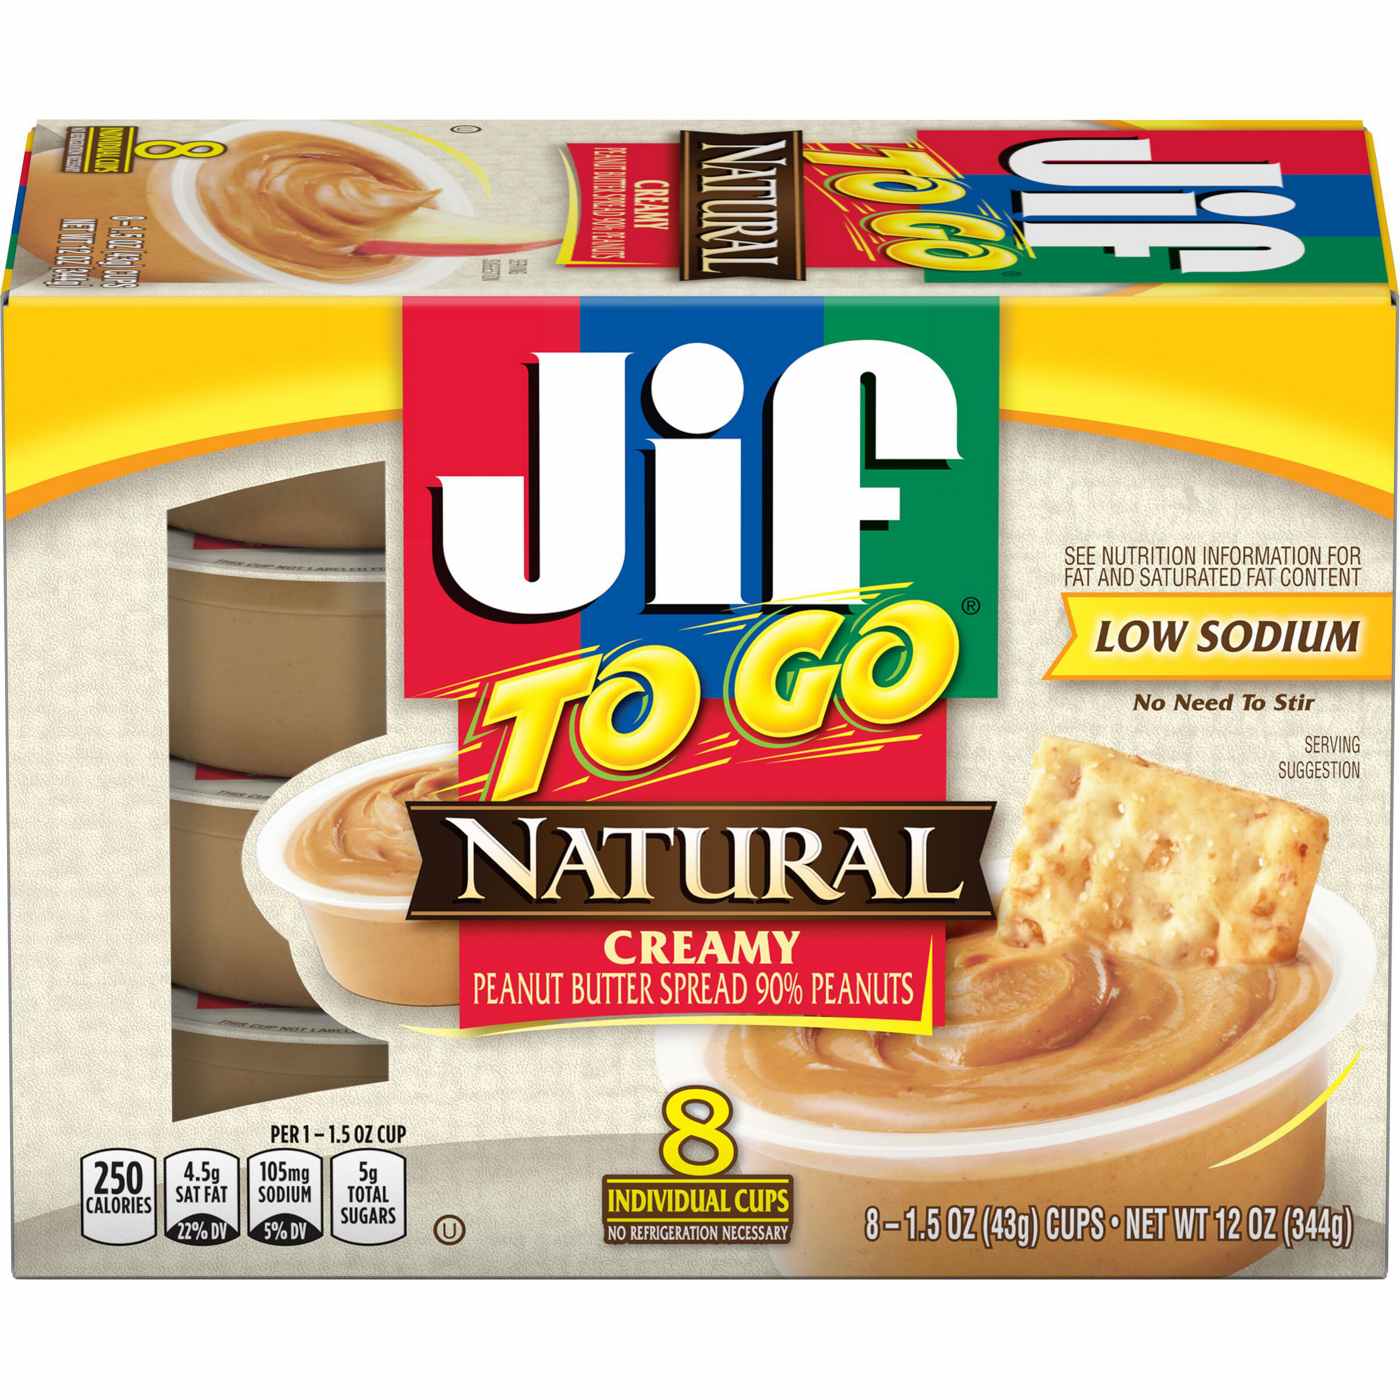 Jif To Go Natural Creamy Peanut Butter 8 pk Cups; image 1 of 5